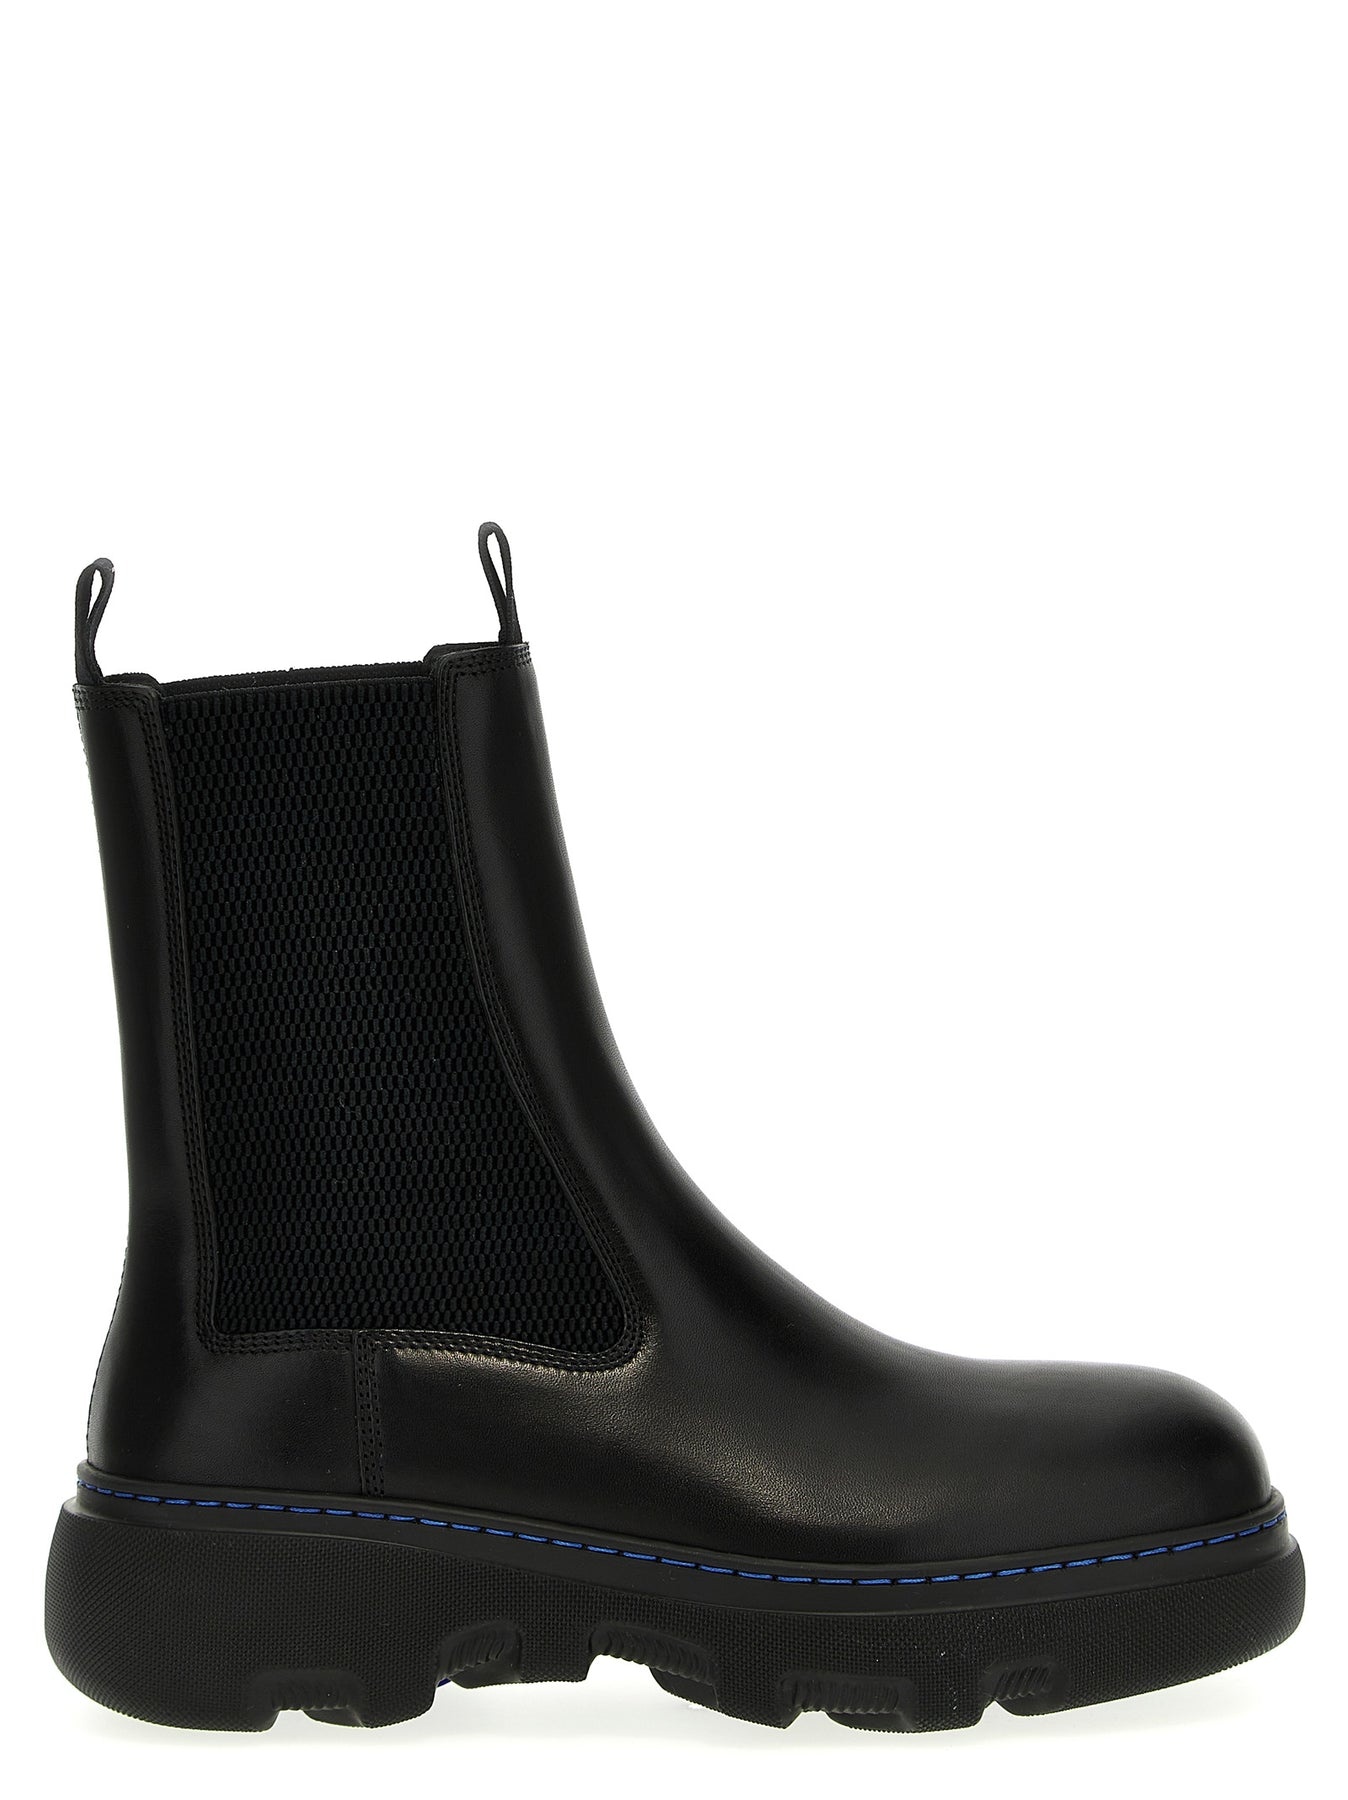 Chelsea Creeper Boots, Ankle Boots Black - 1